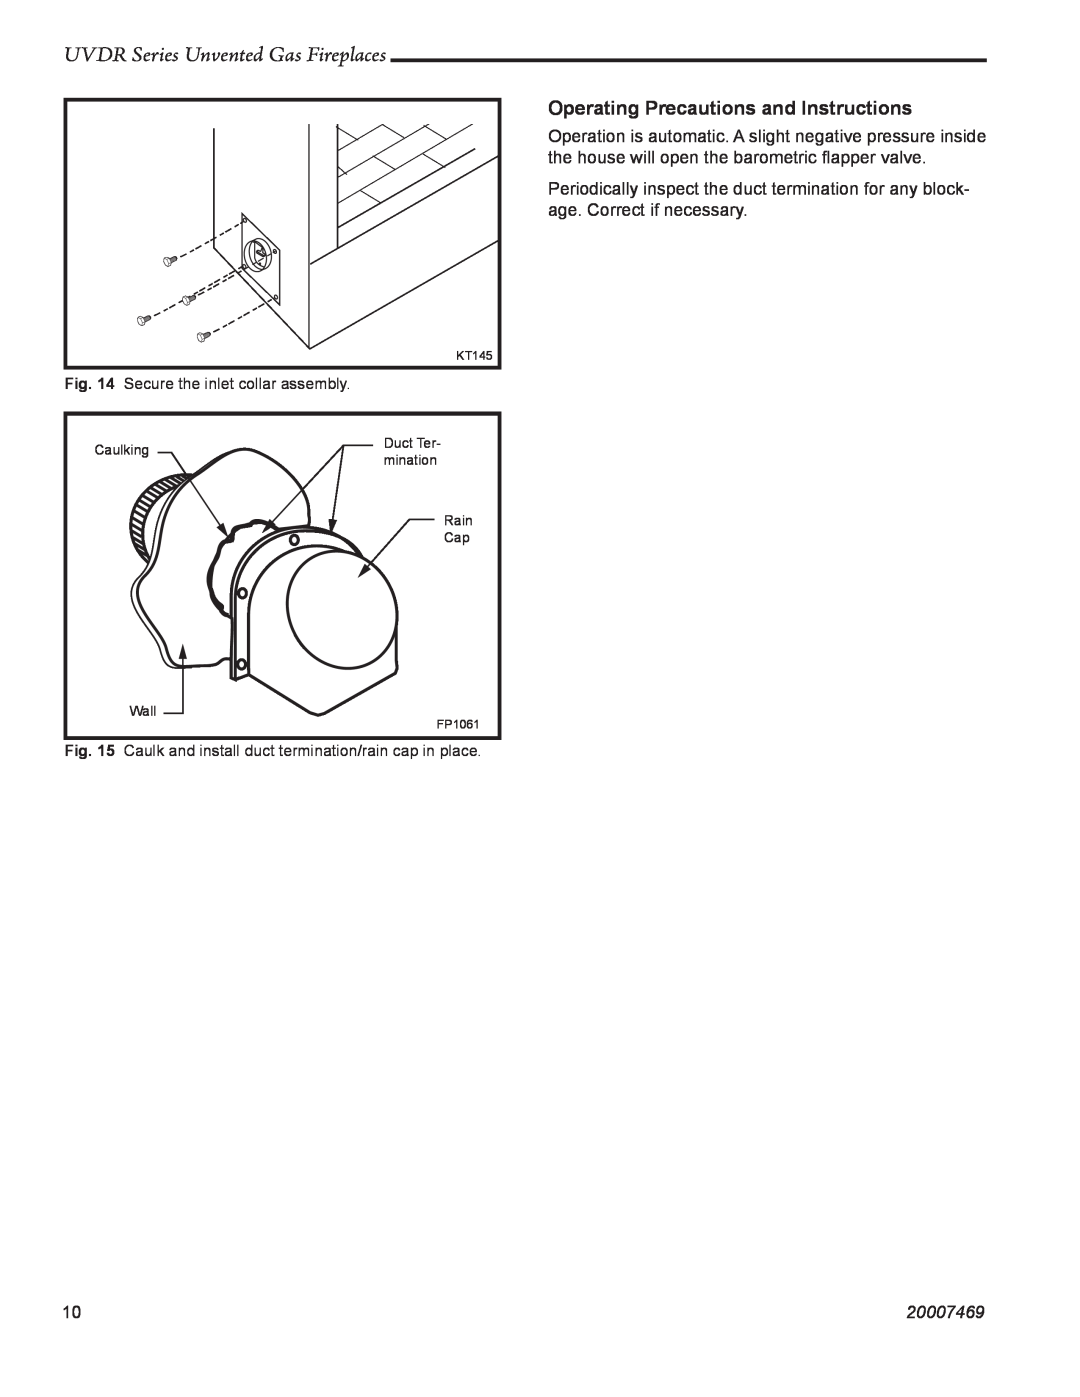 CFM Corporation UVDR42C, UVDR36C Operating Precautions and Instructions, UVDR Series Unvented Gas Fireplaces, 20007469 